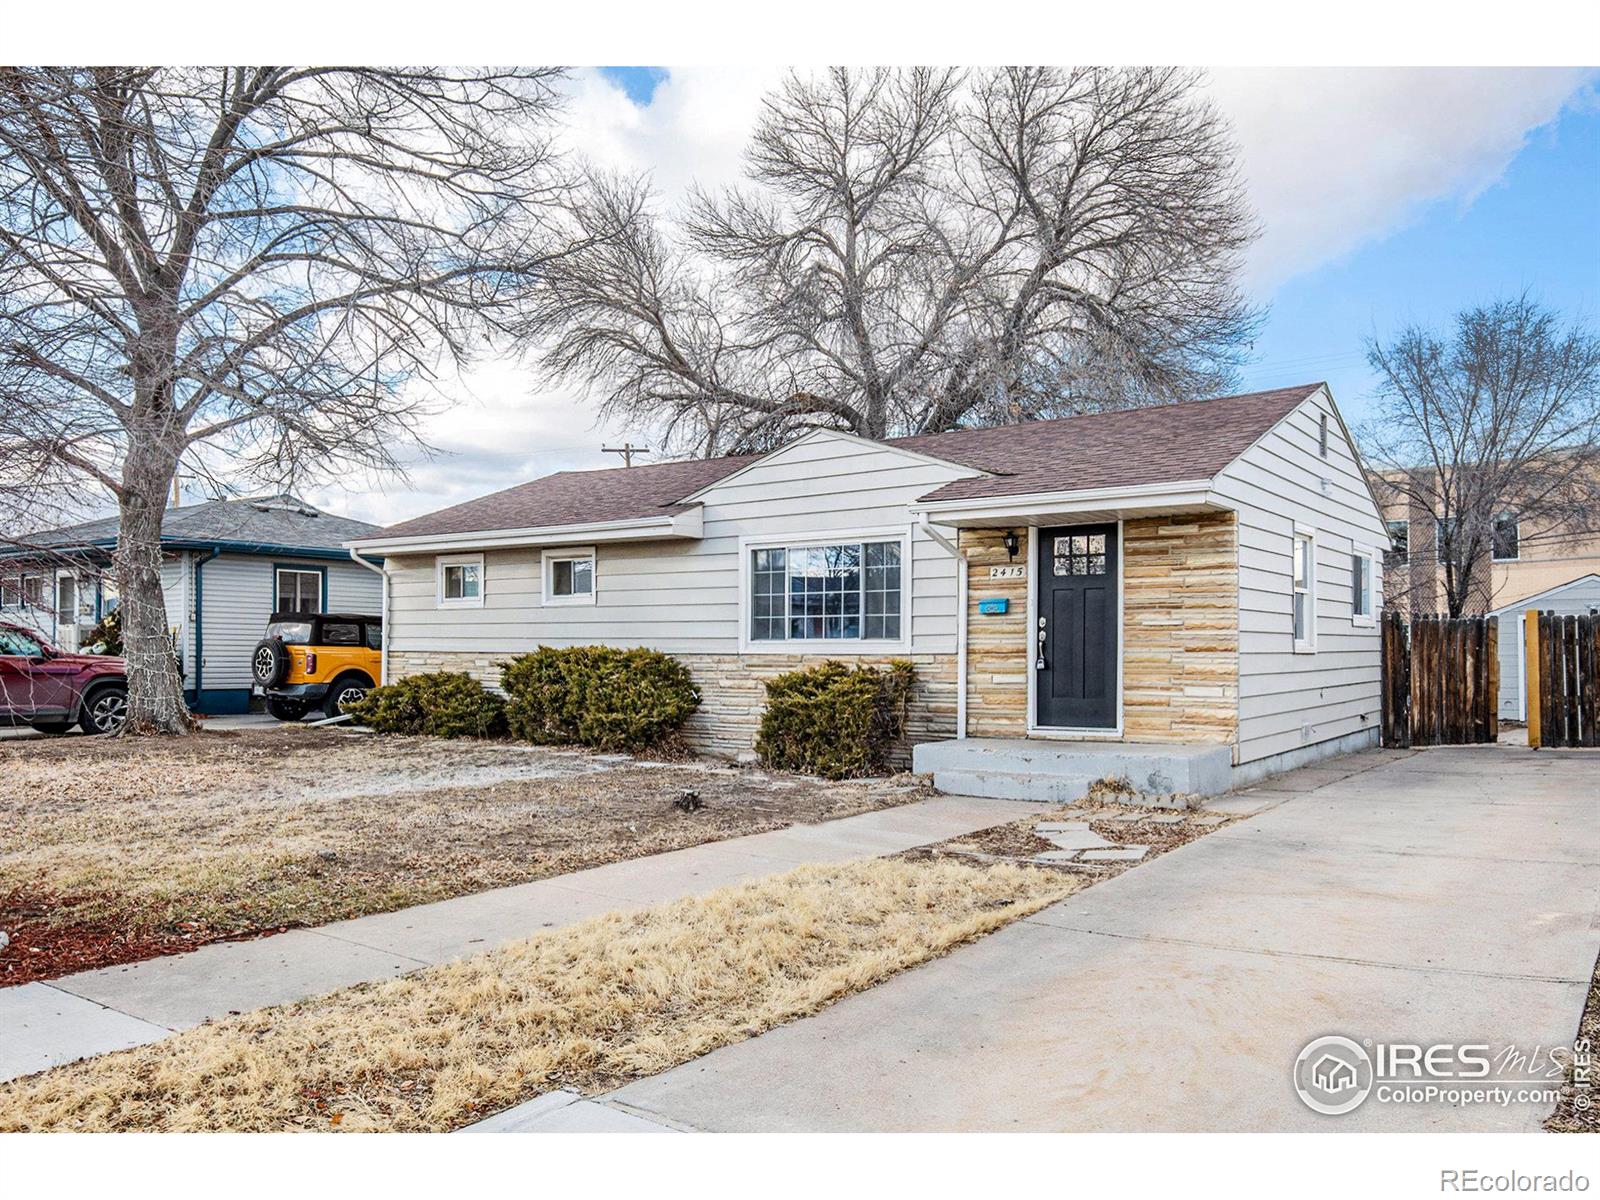 Report Image for 2415 W 6th Street,Greeley, Colorado